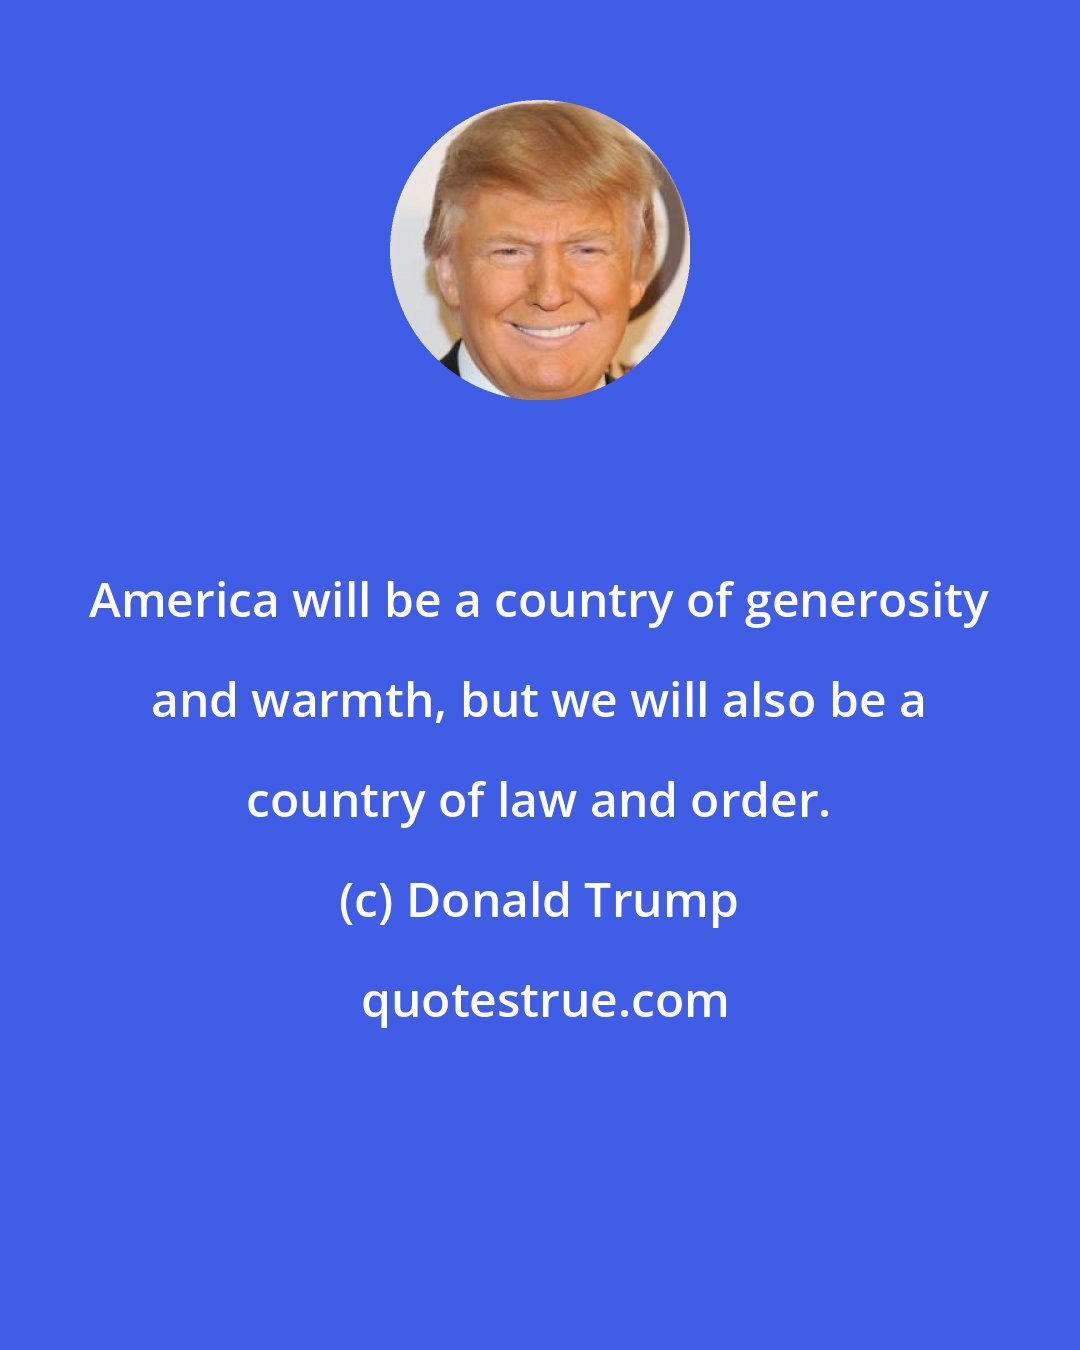 Donald Trump: America will be a country of generosity and warmth, but we will also be a country of law and order.